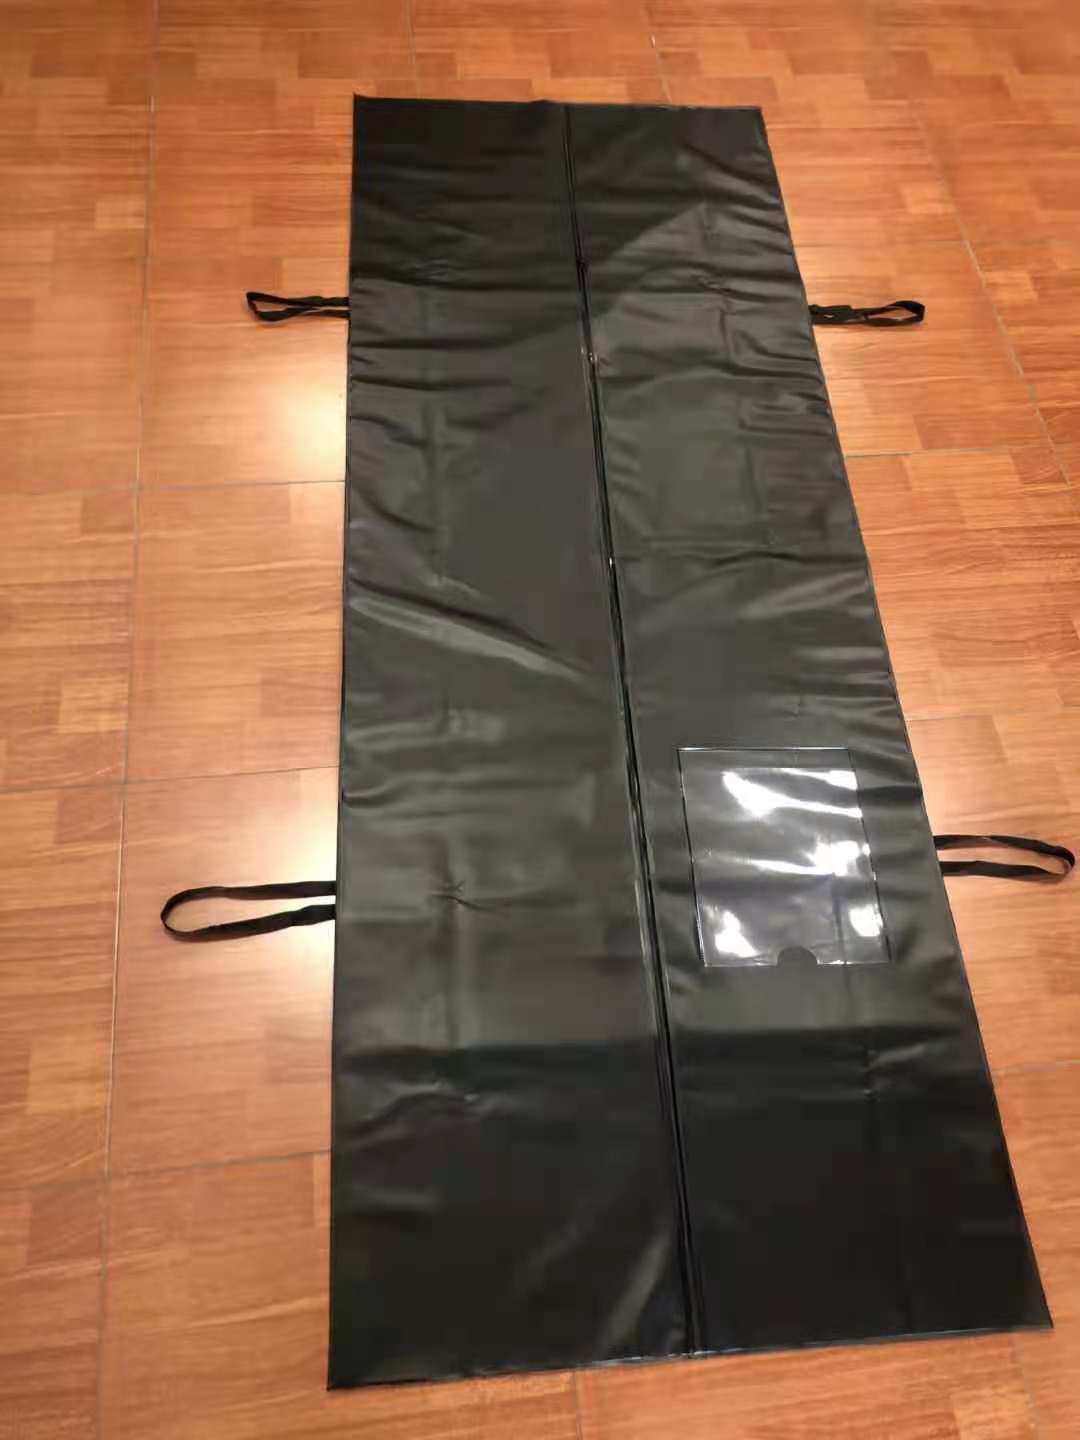 PVC Corpse Cadaver Body Bags for Dead Bodies